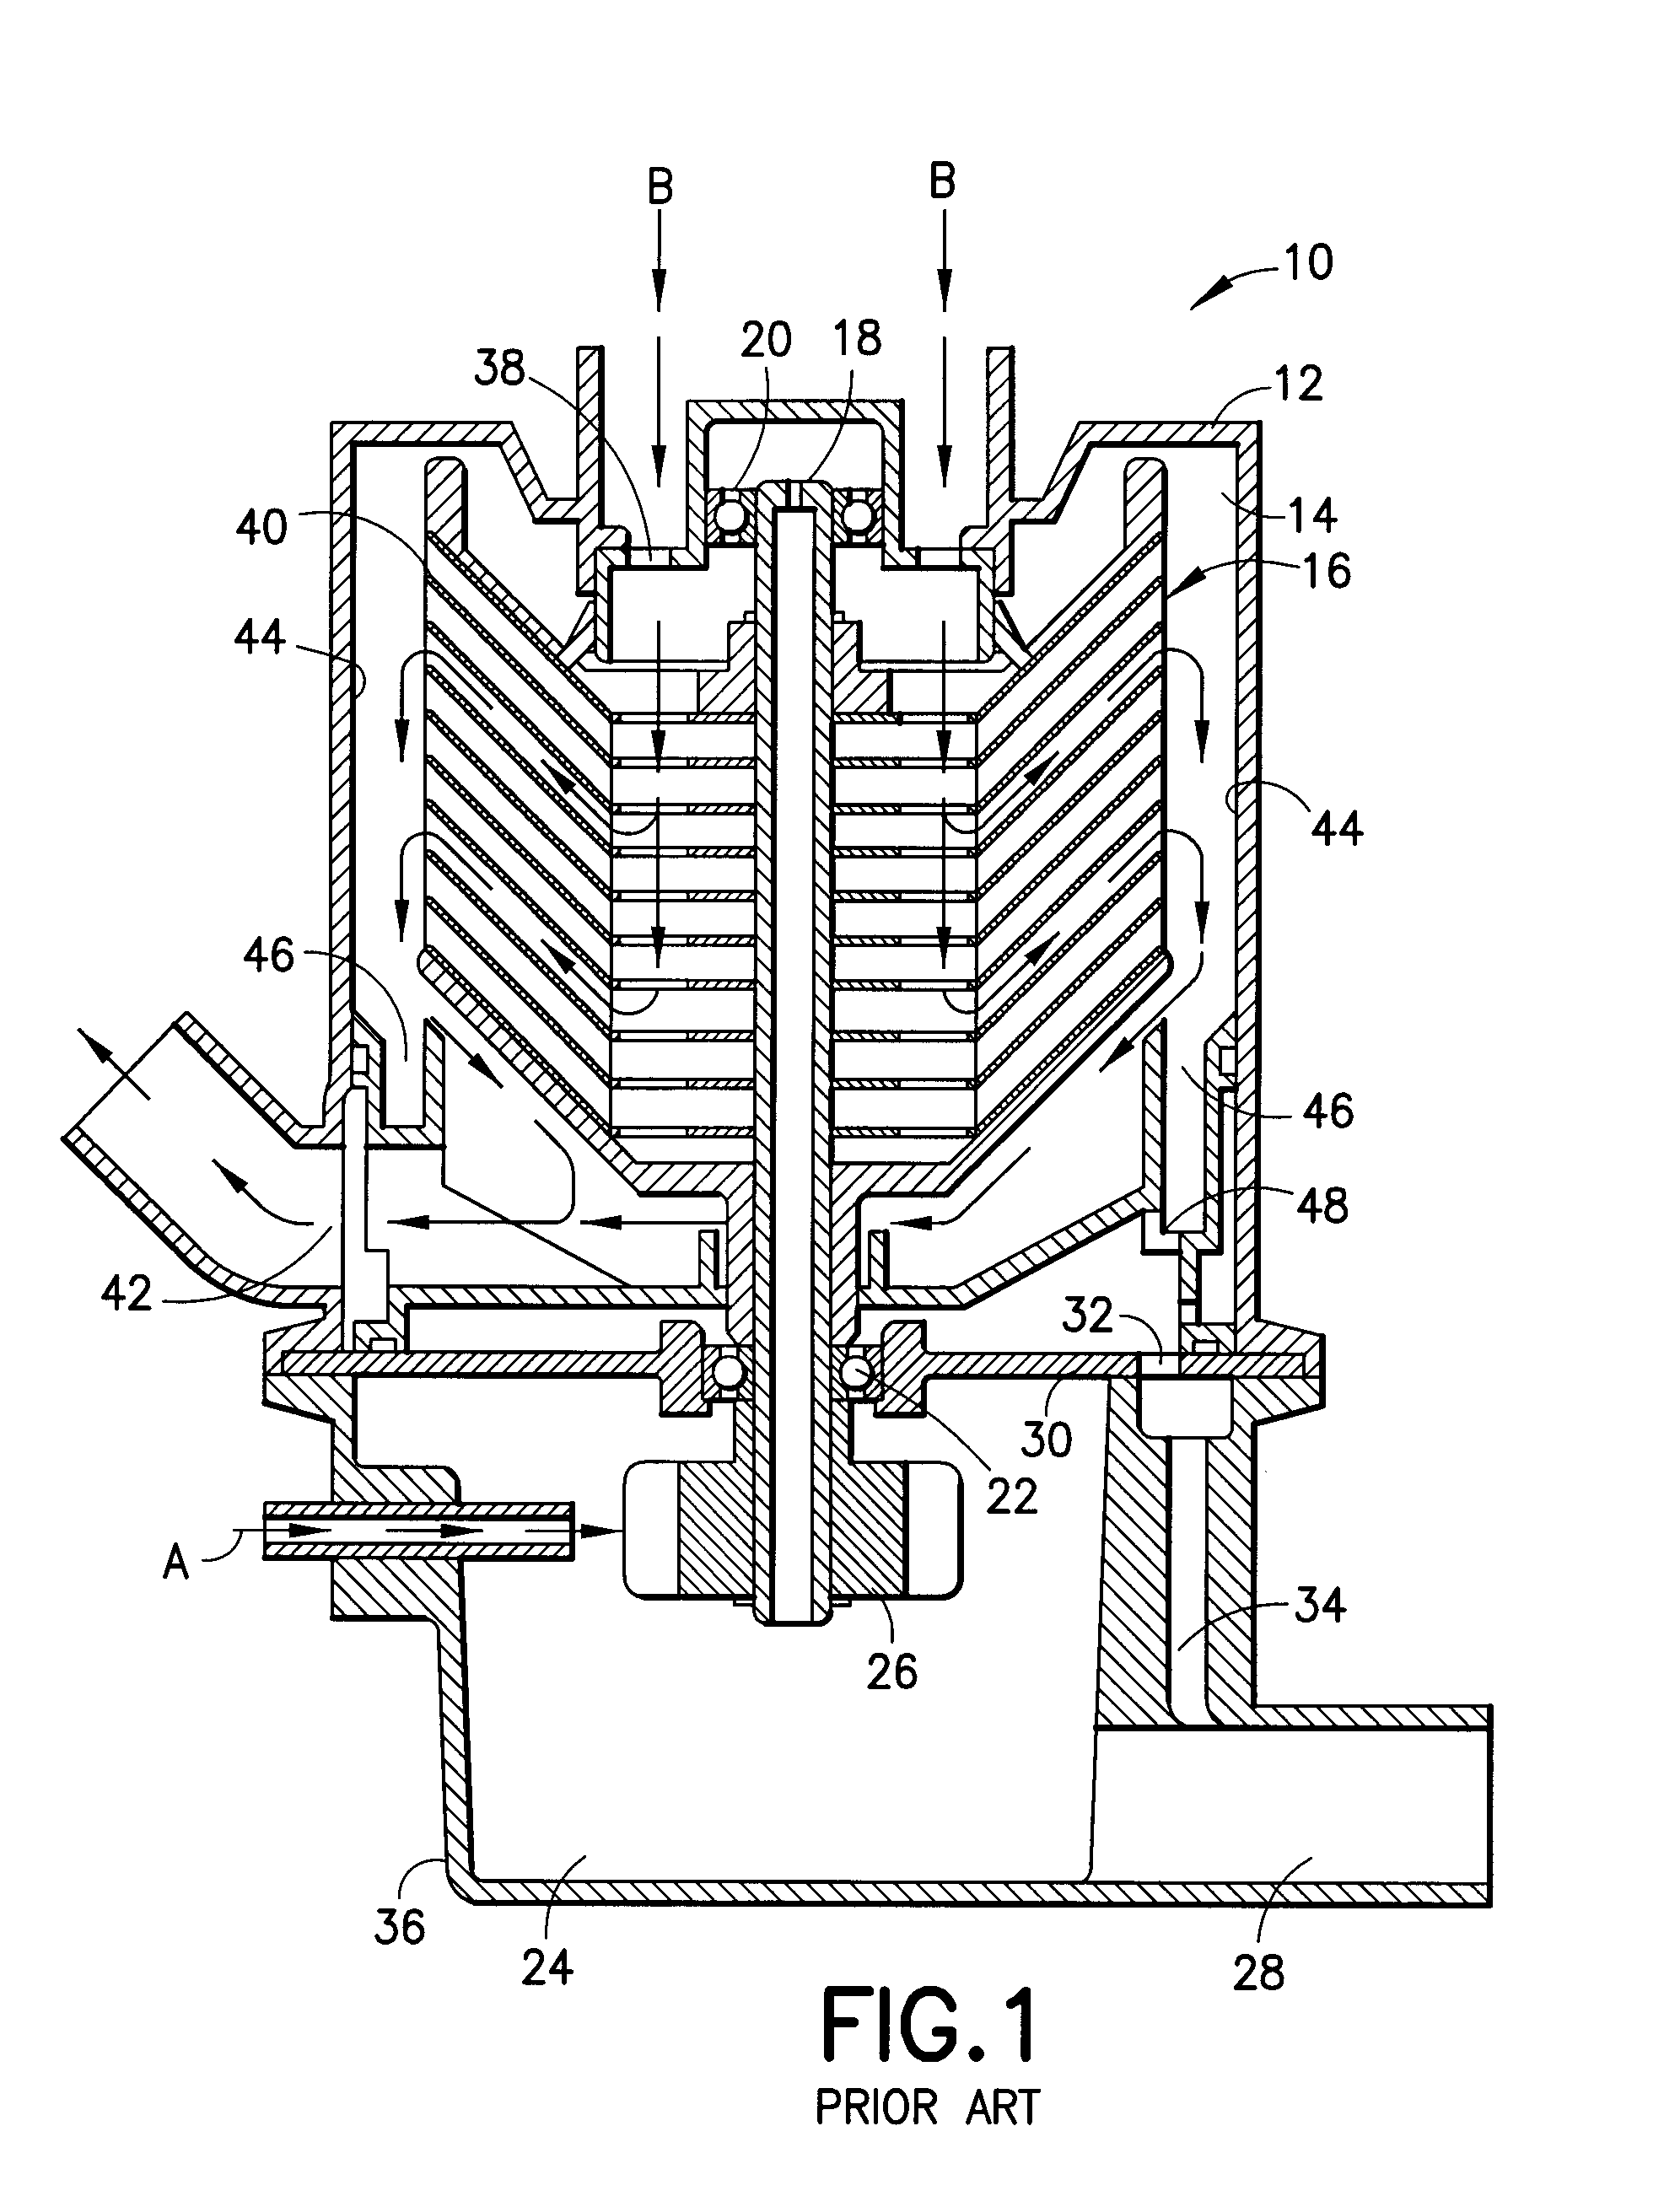 Centrifugal separator for cleaning gas generated by an internal combustion engine and a method for operating the same